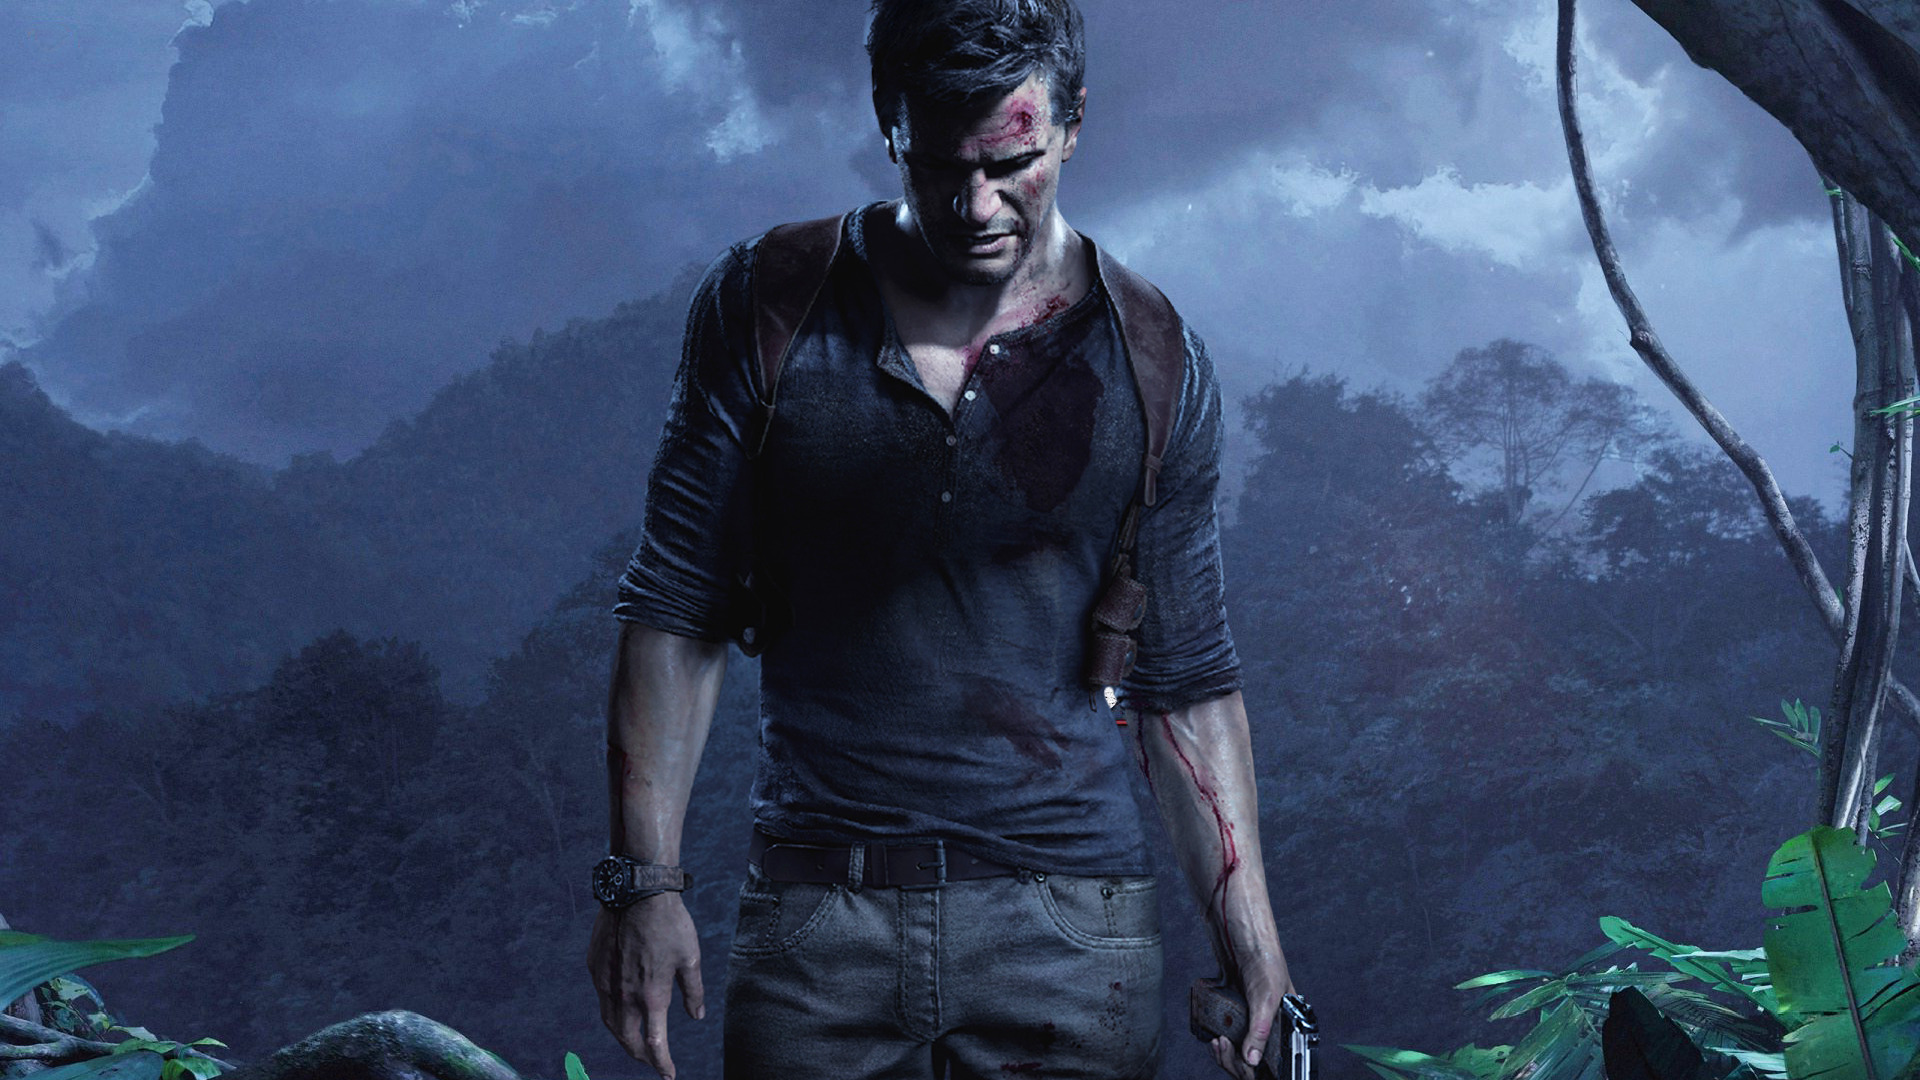 uncharted 2 for pc free